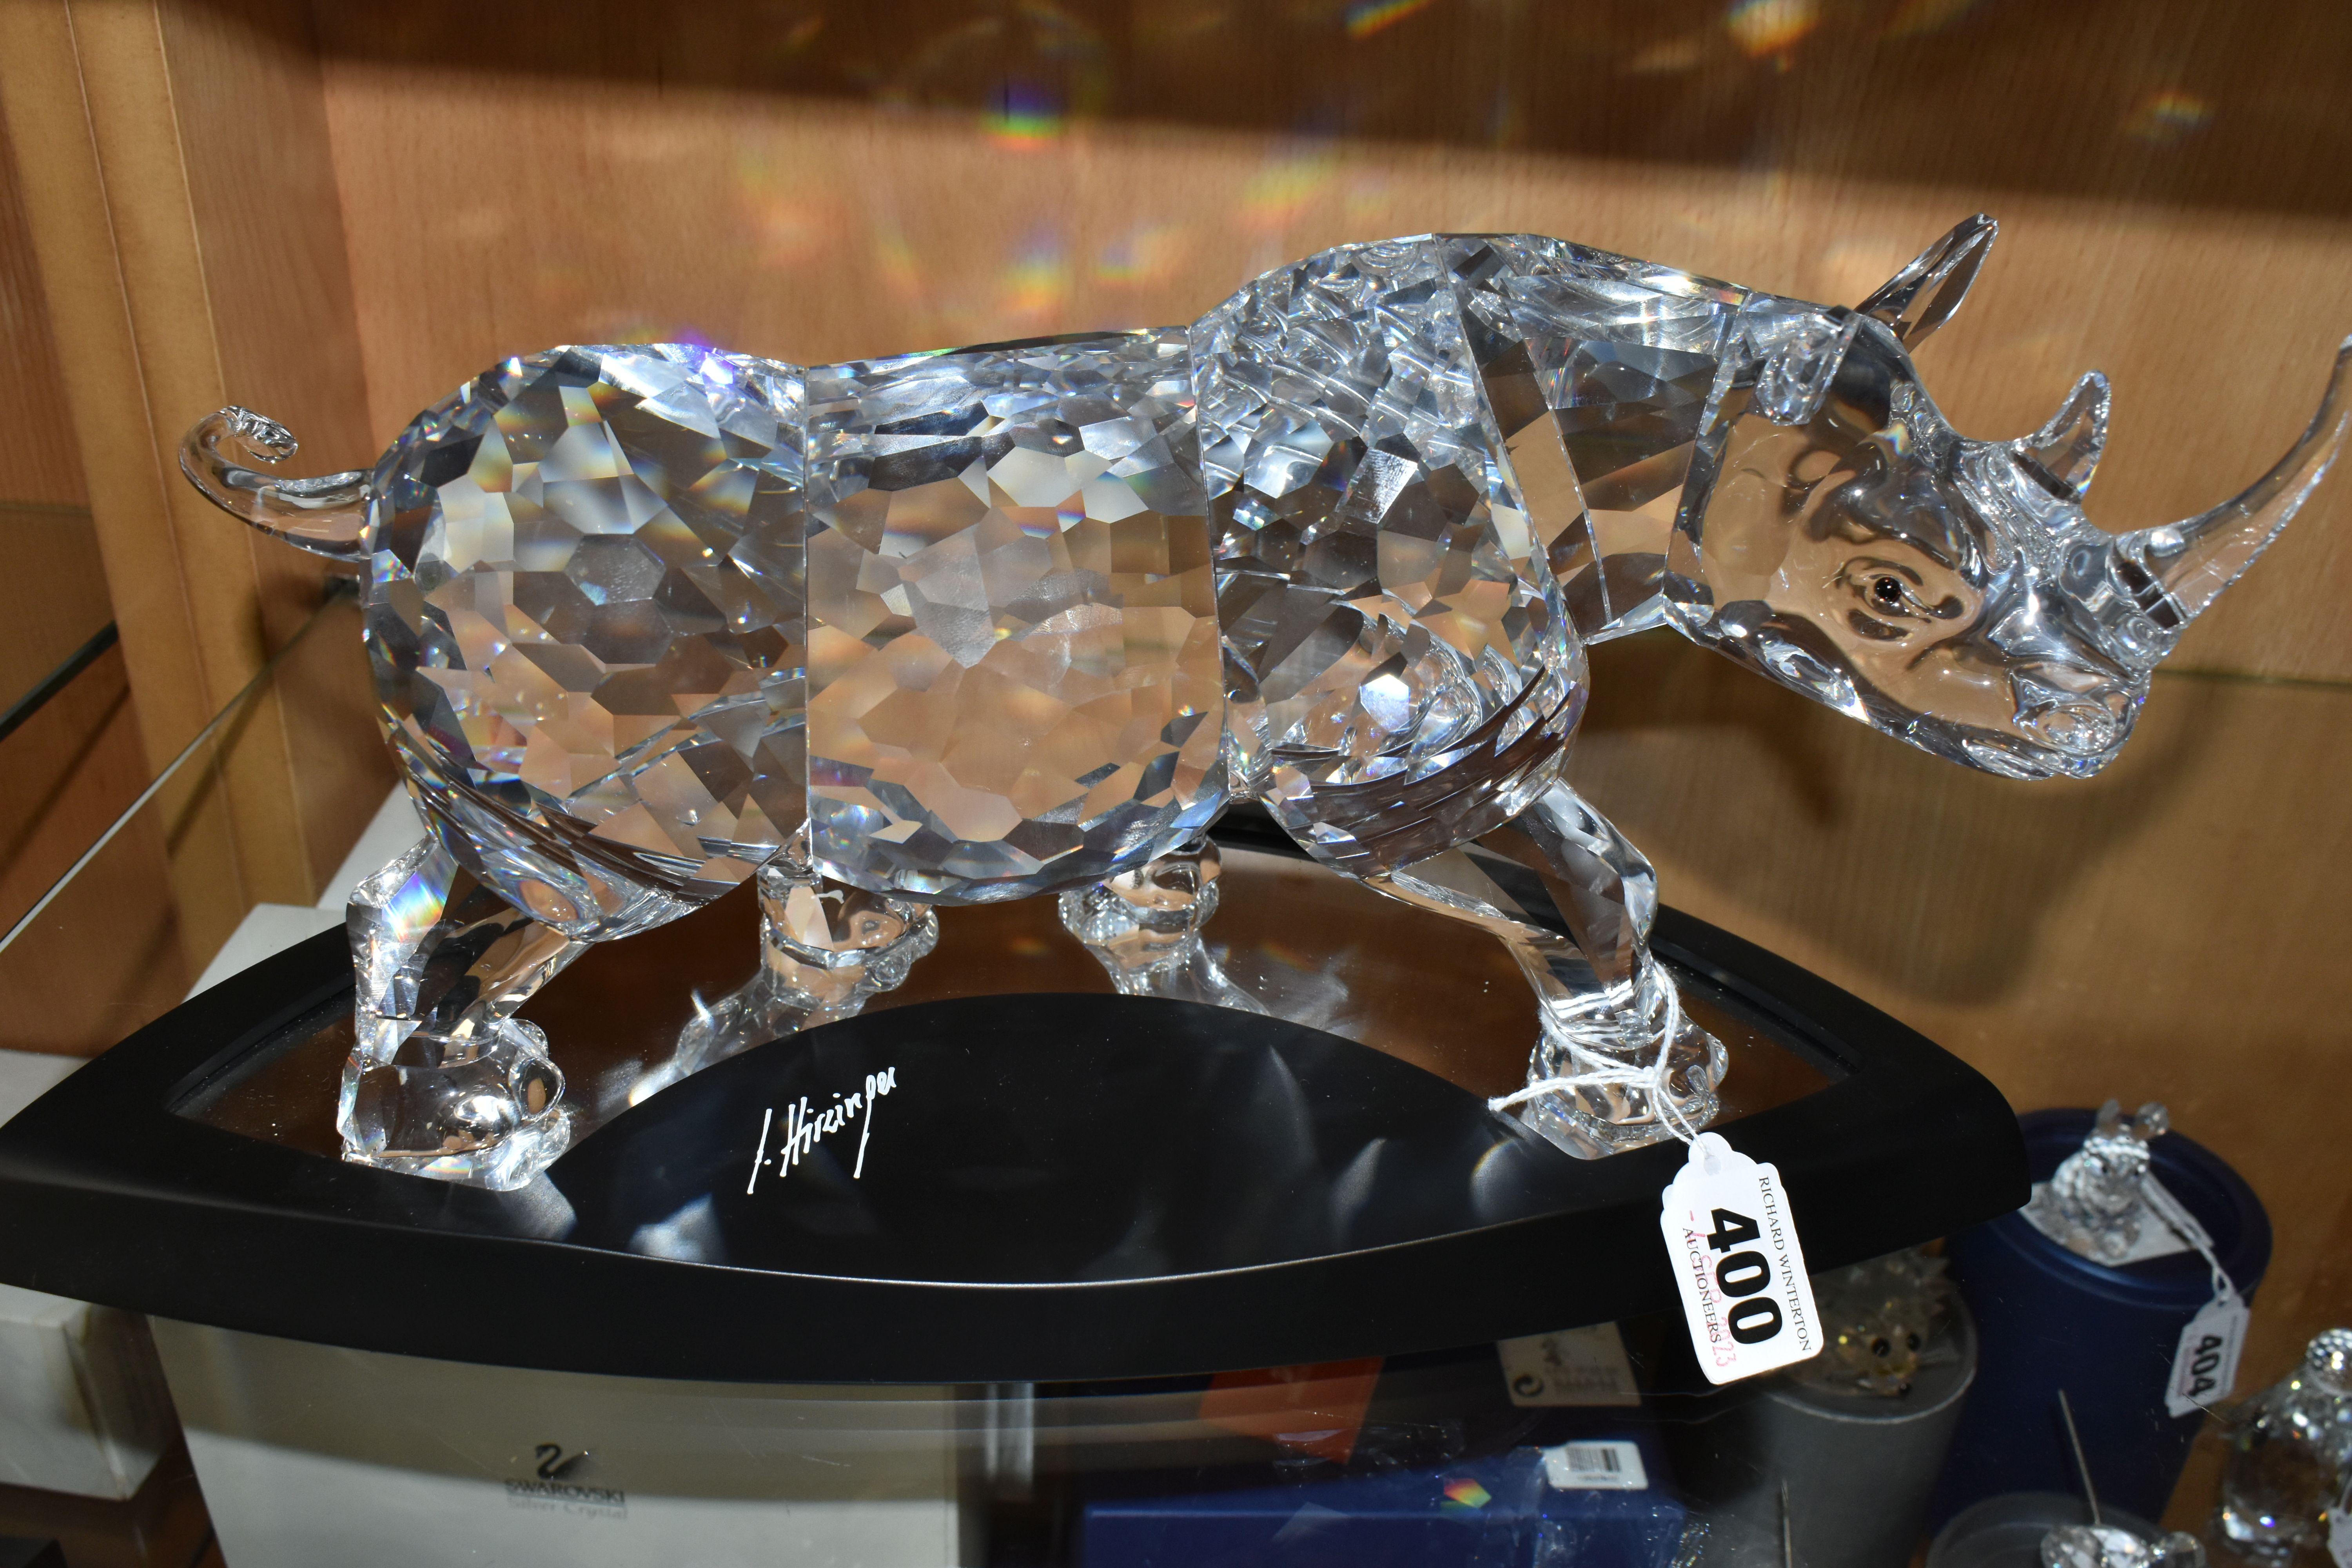 A CASED/OUTER BOX SWAROVSKI CRYSTAL LIMITED EDITION RHINO SCULPTURE, numbered 4825/10000 to - Image 4 of 8